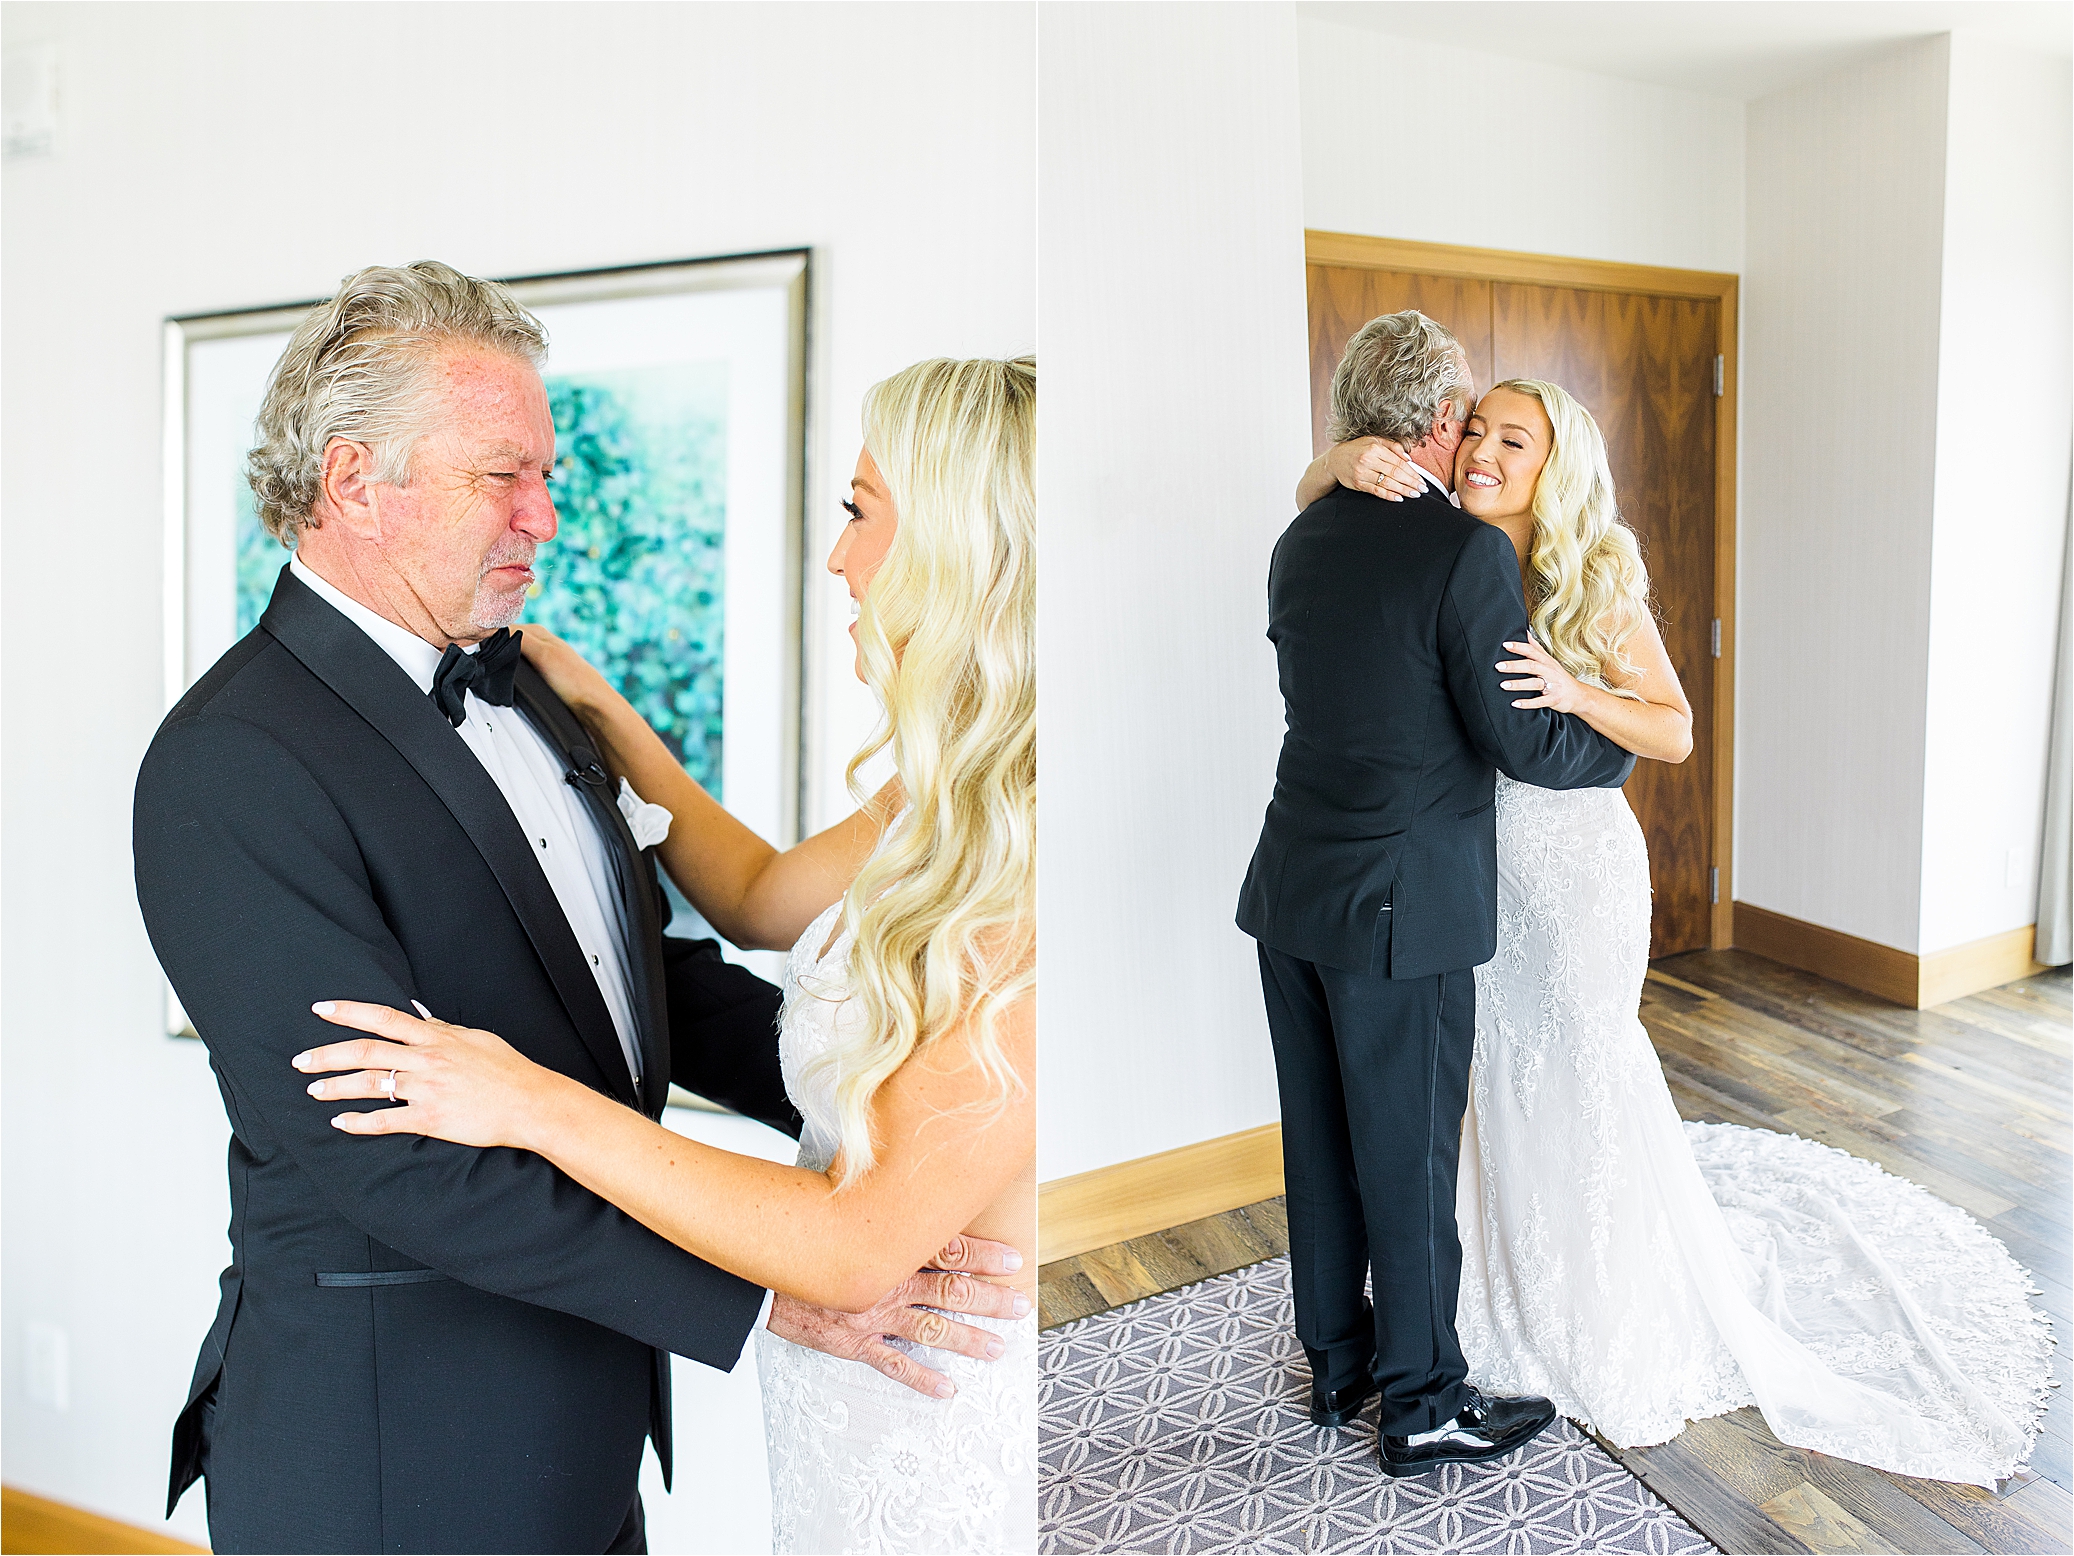 A bride in her wedding dress shares an emotional first look with her dad as he begins to cry and she shares a hug with him in a hotel room at JW Marriott in Austin, Texas